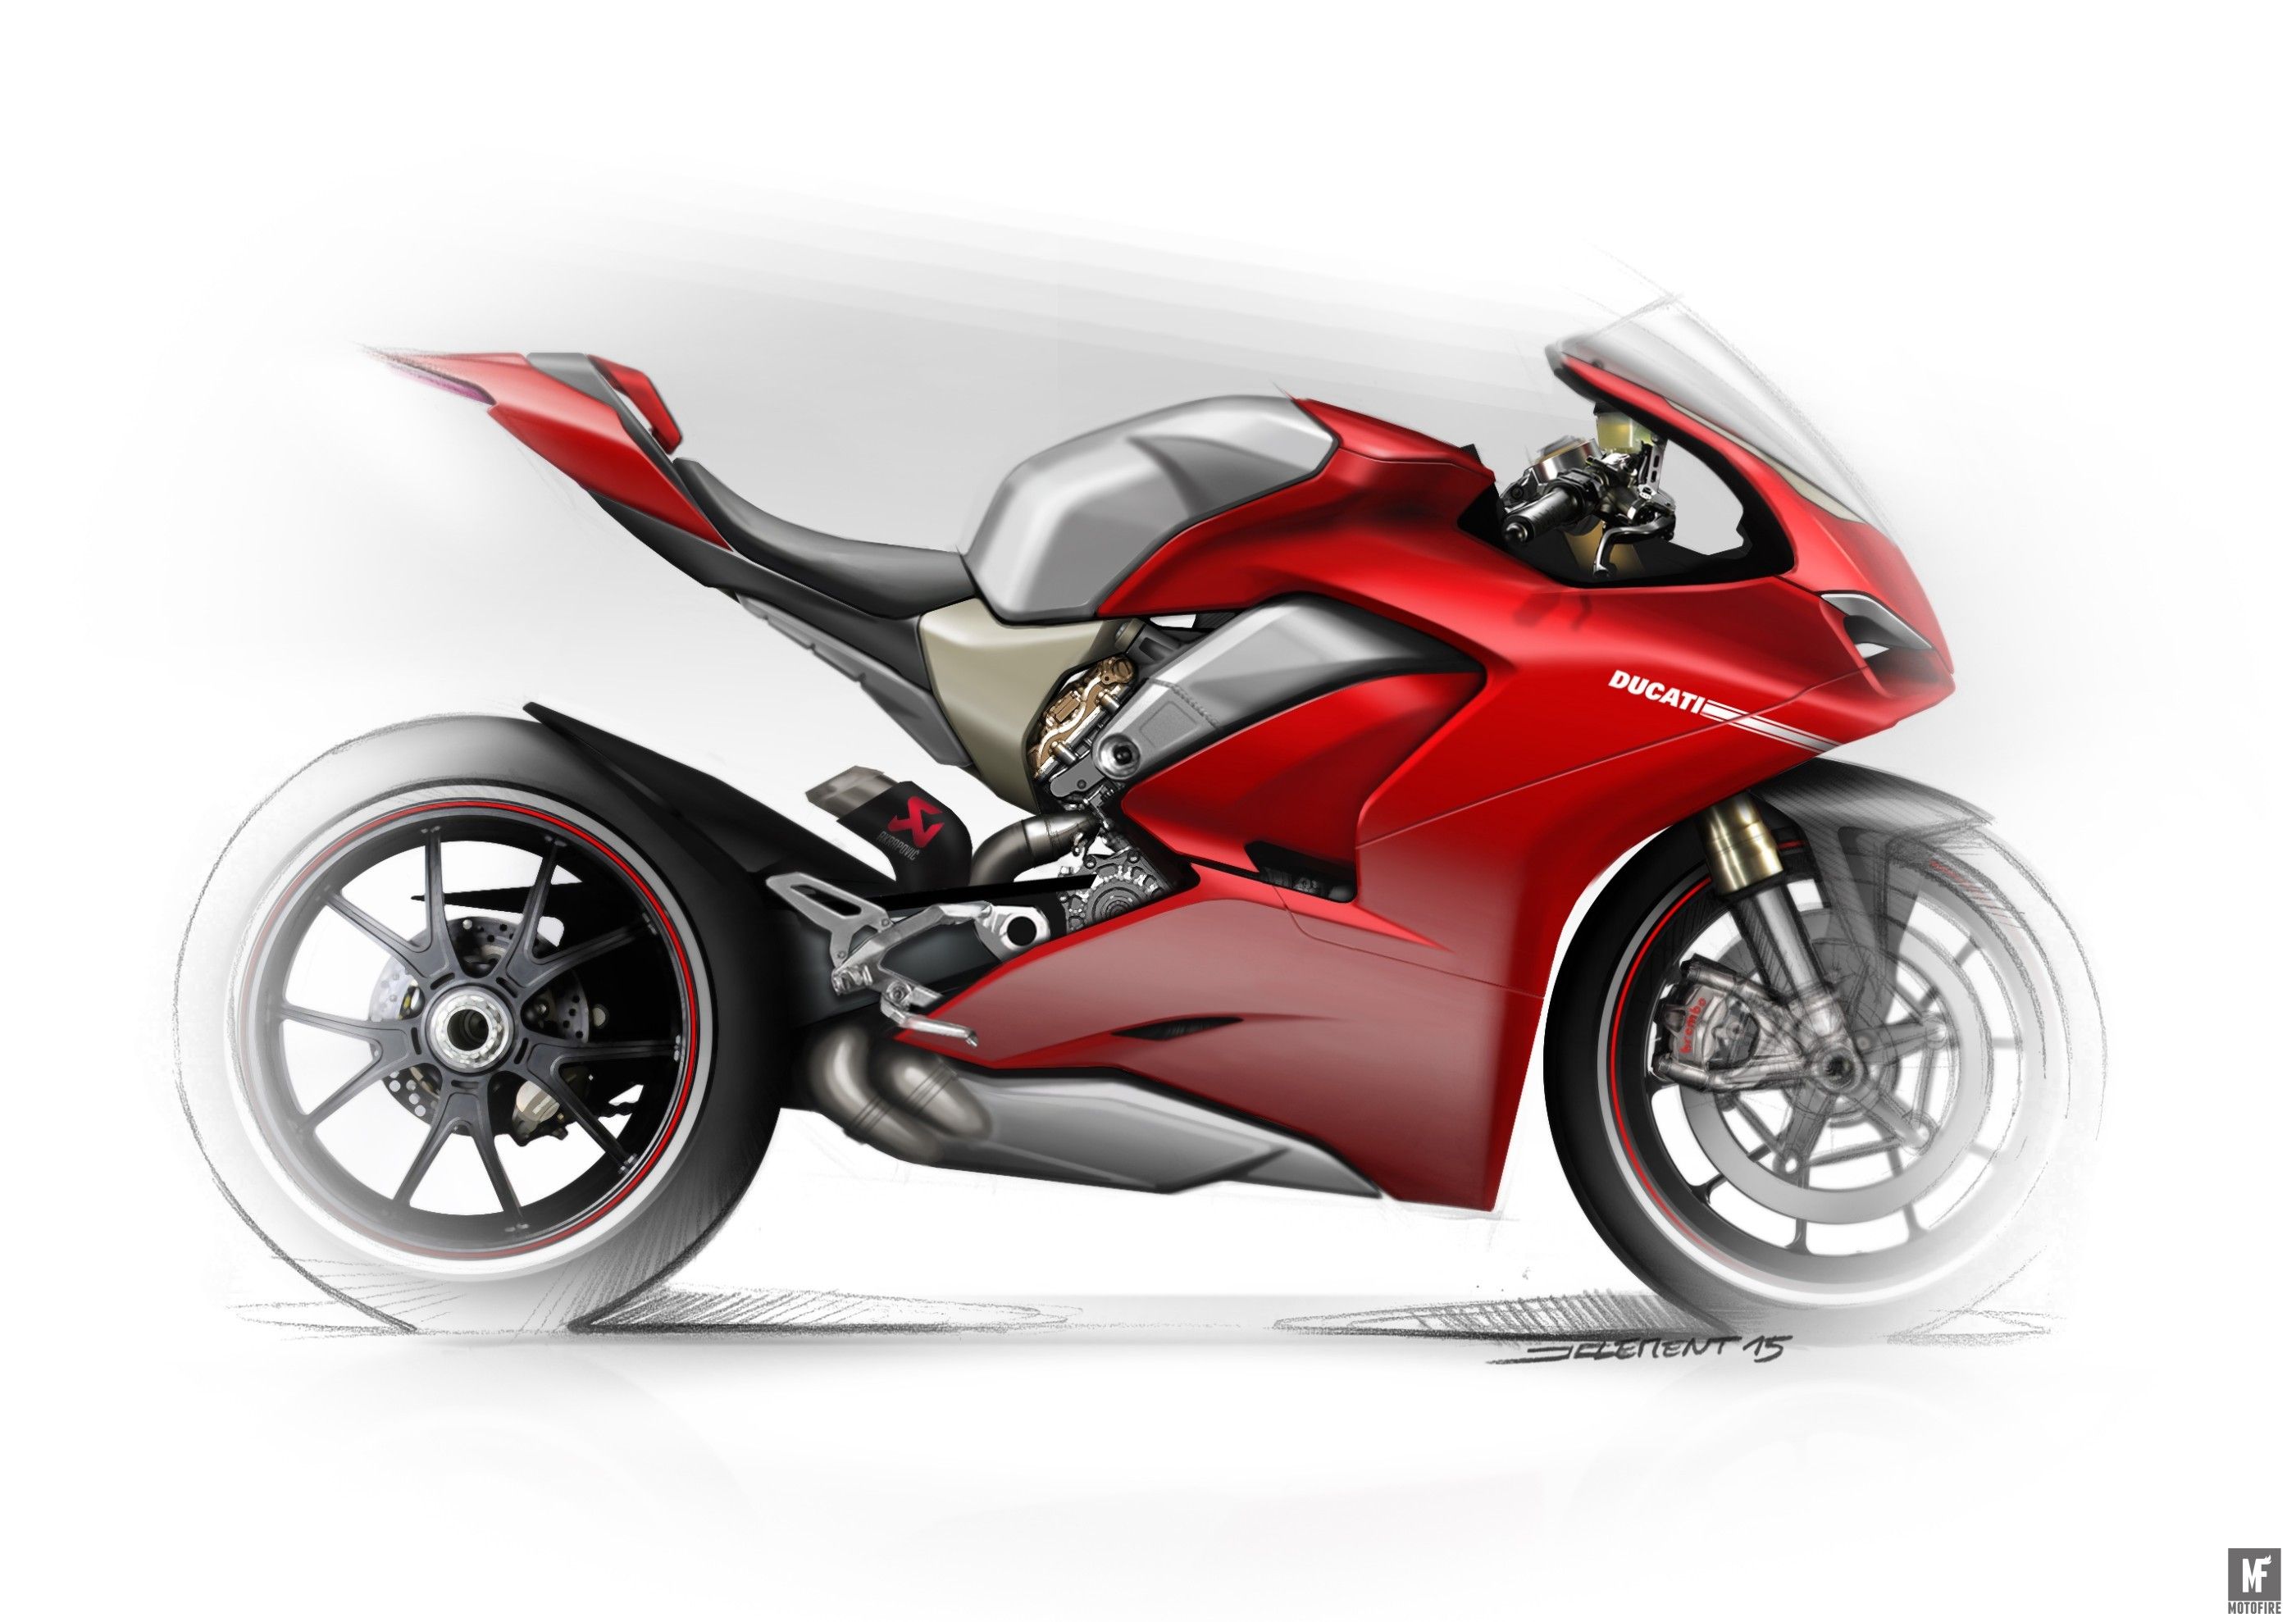 The design sketches for the Ducati Panigale V4 are stunning